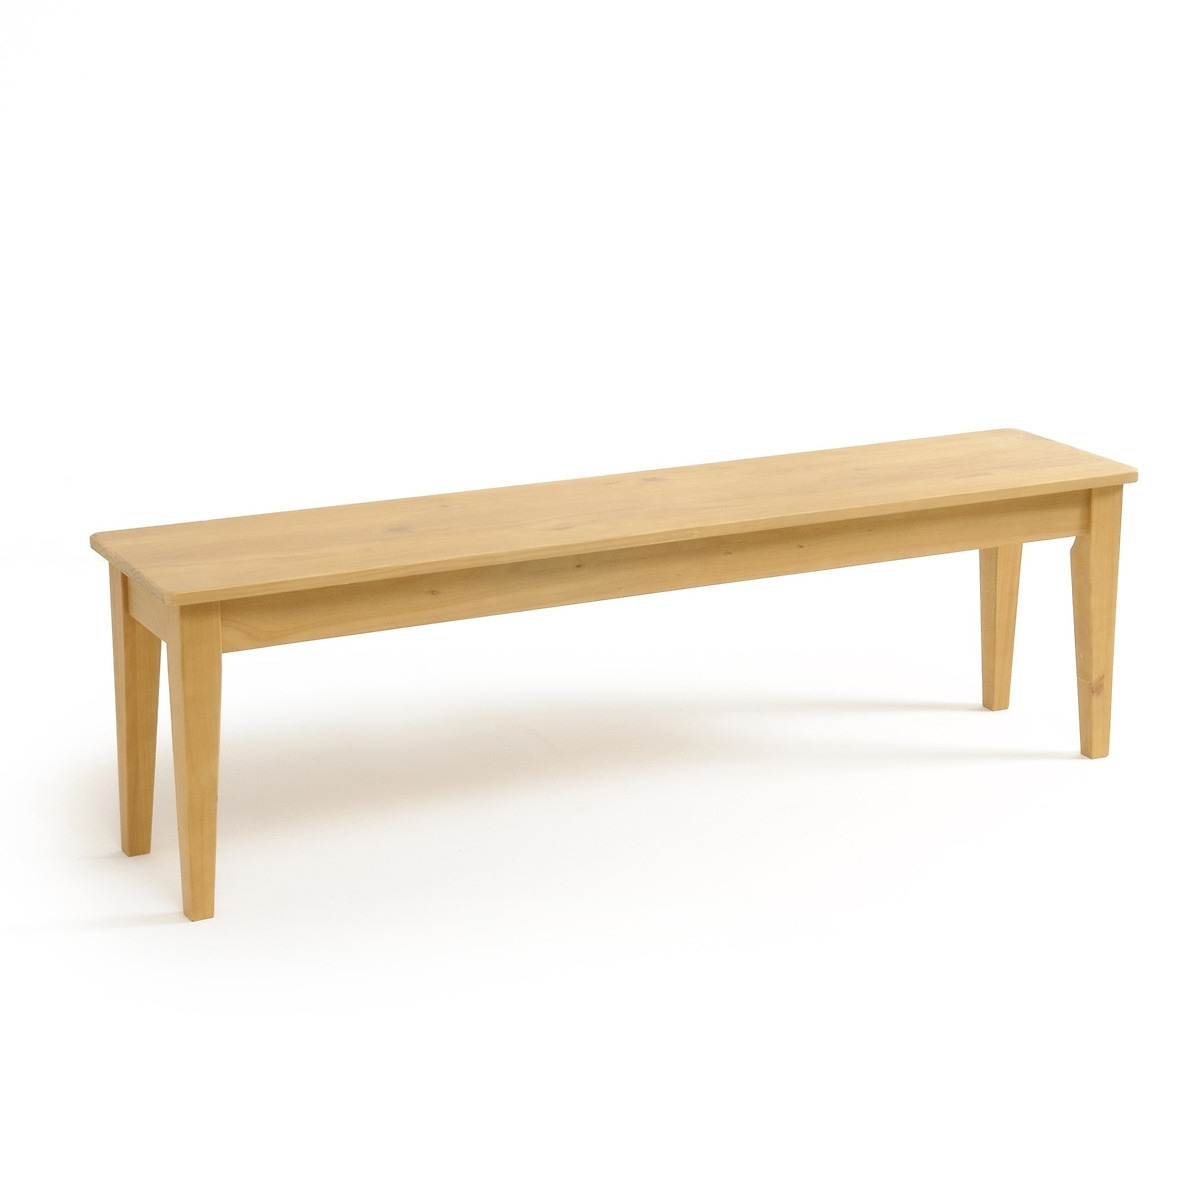 Alvina Solid Pine 3-Seat Bench - image 1